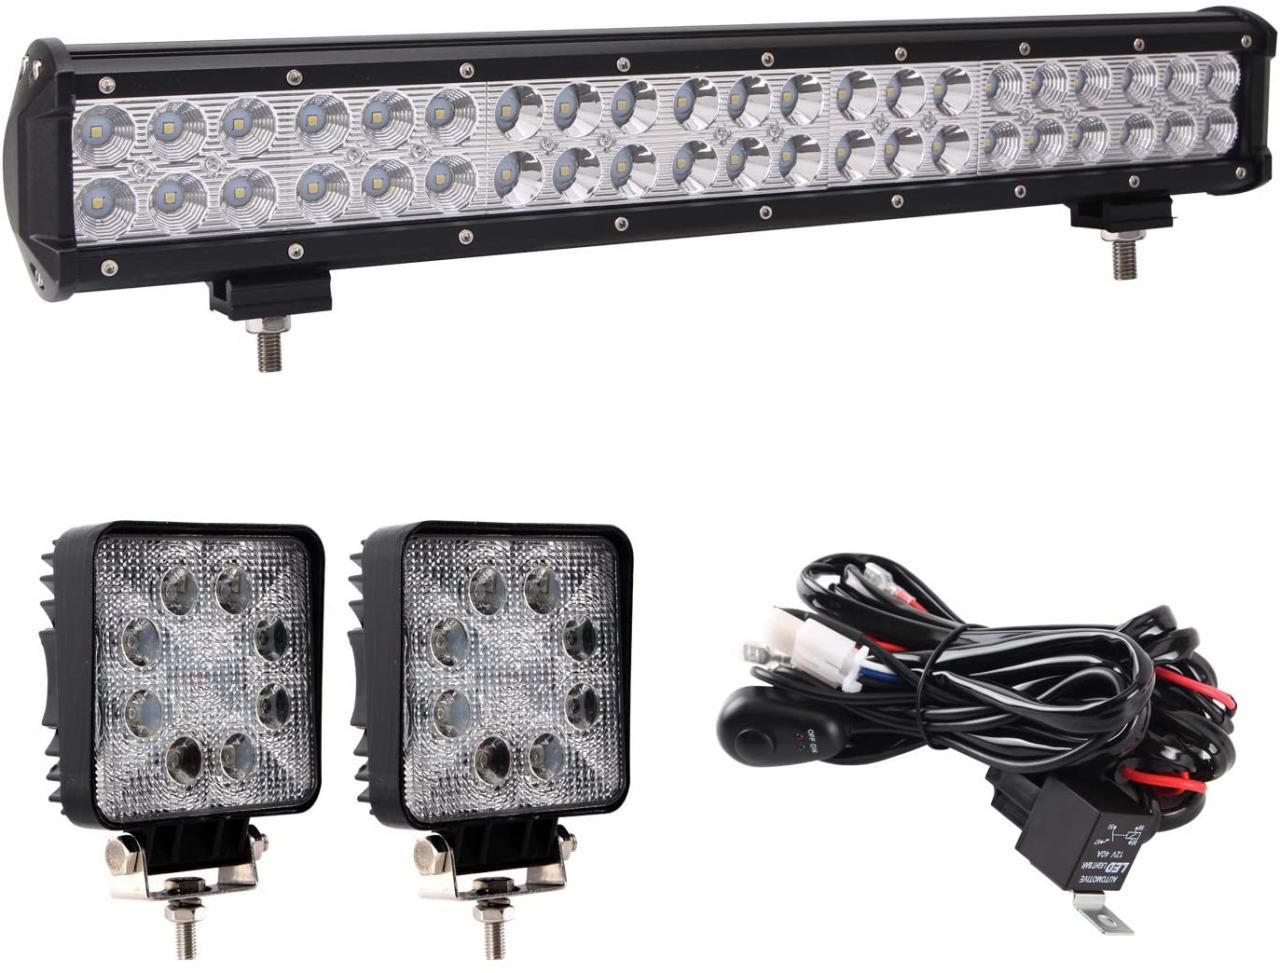 LED Light Bar Quandingyi Inventory cleanup selling sale 20